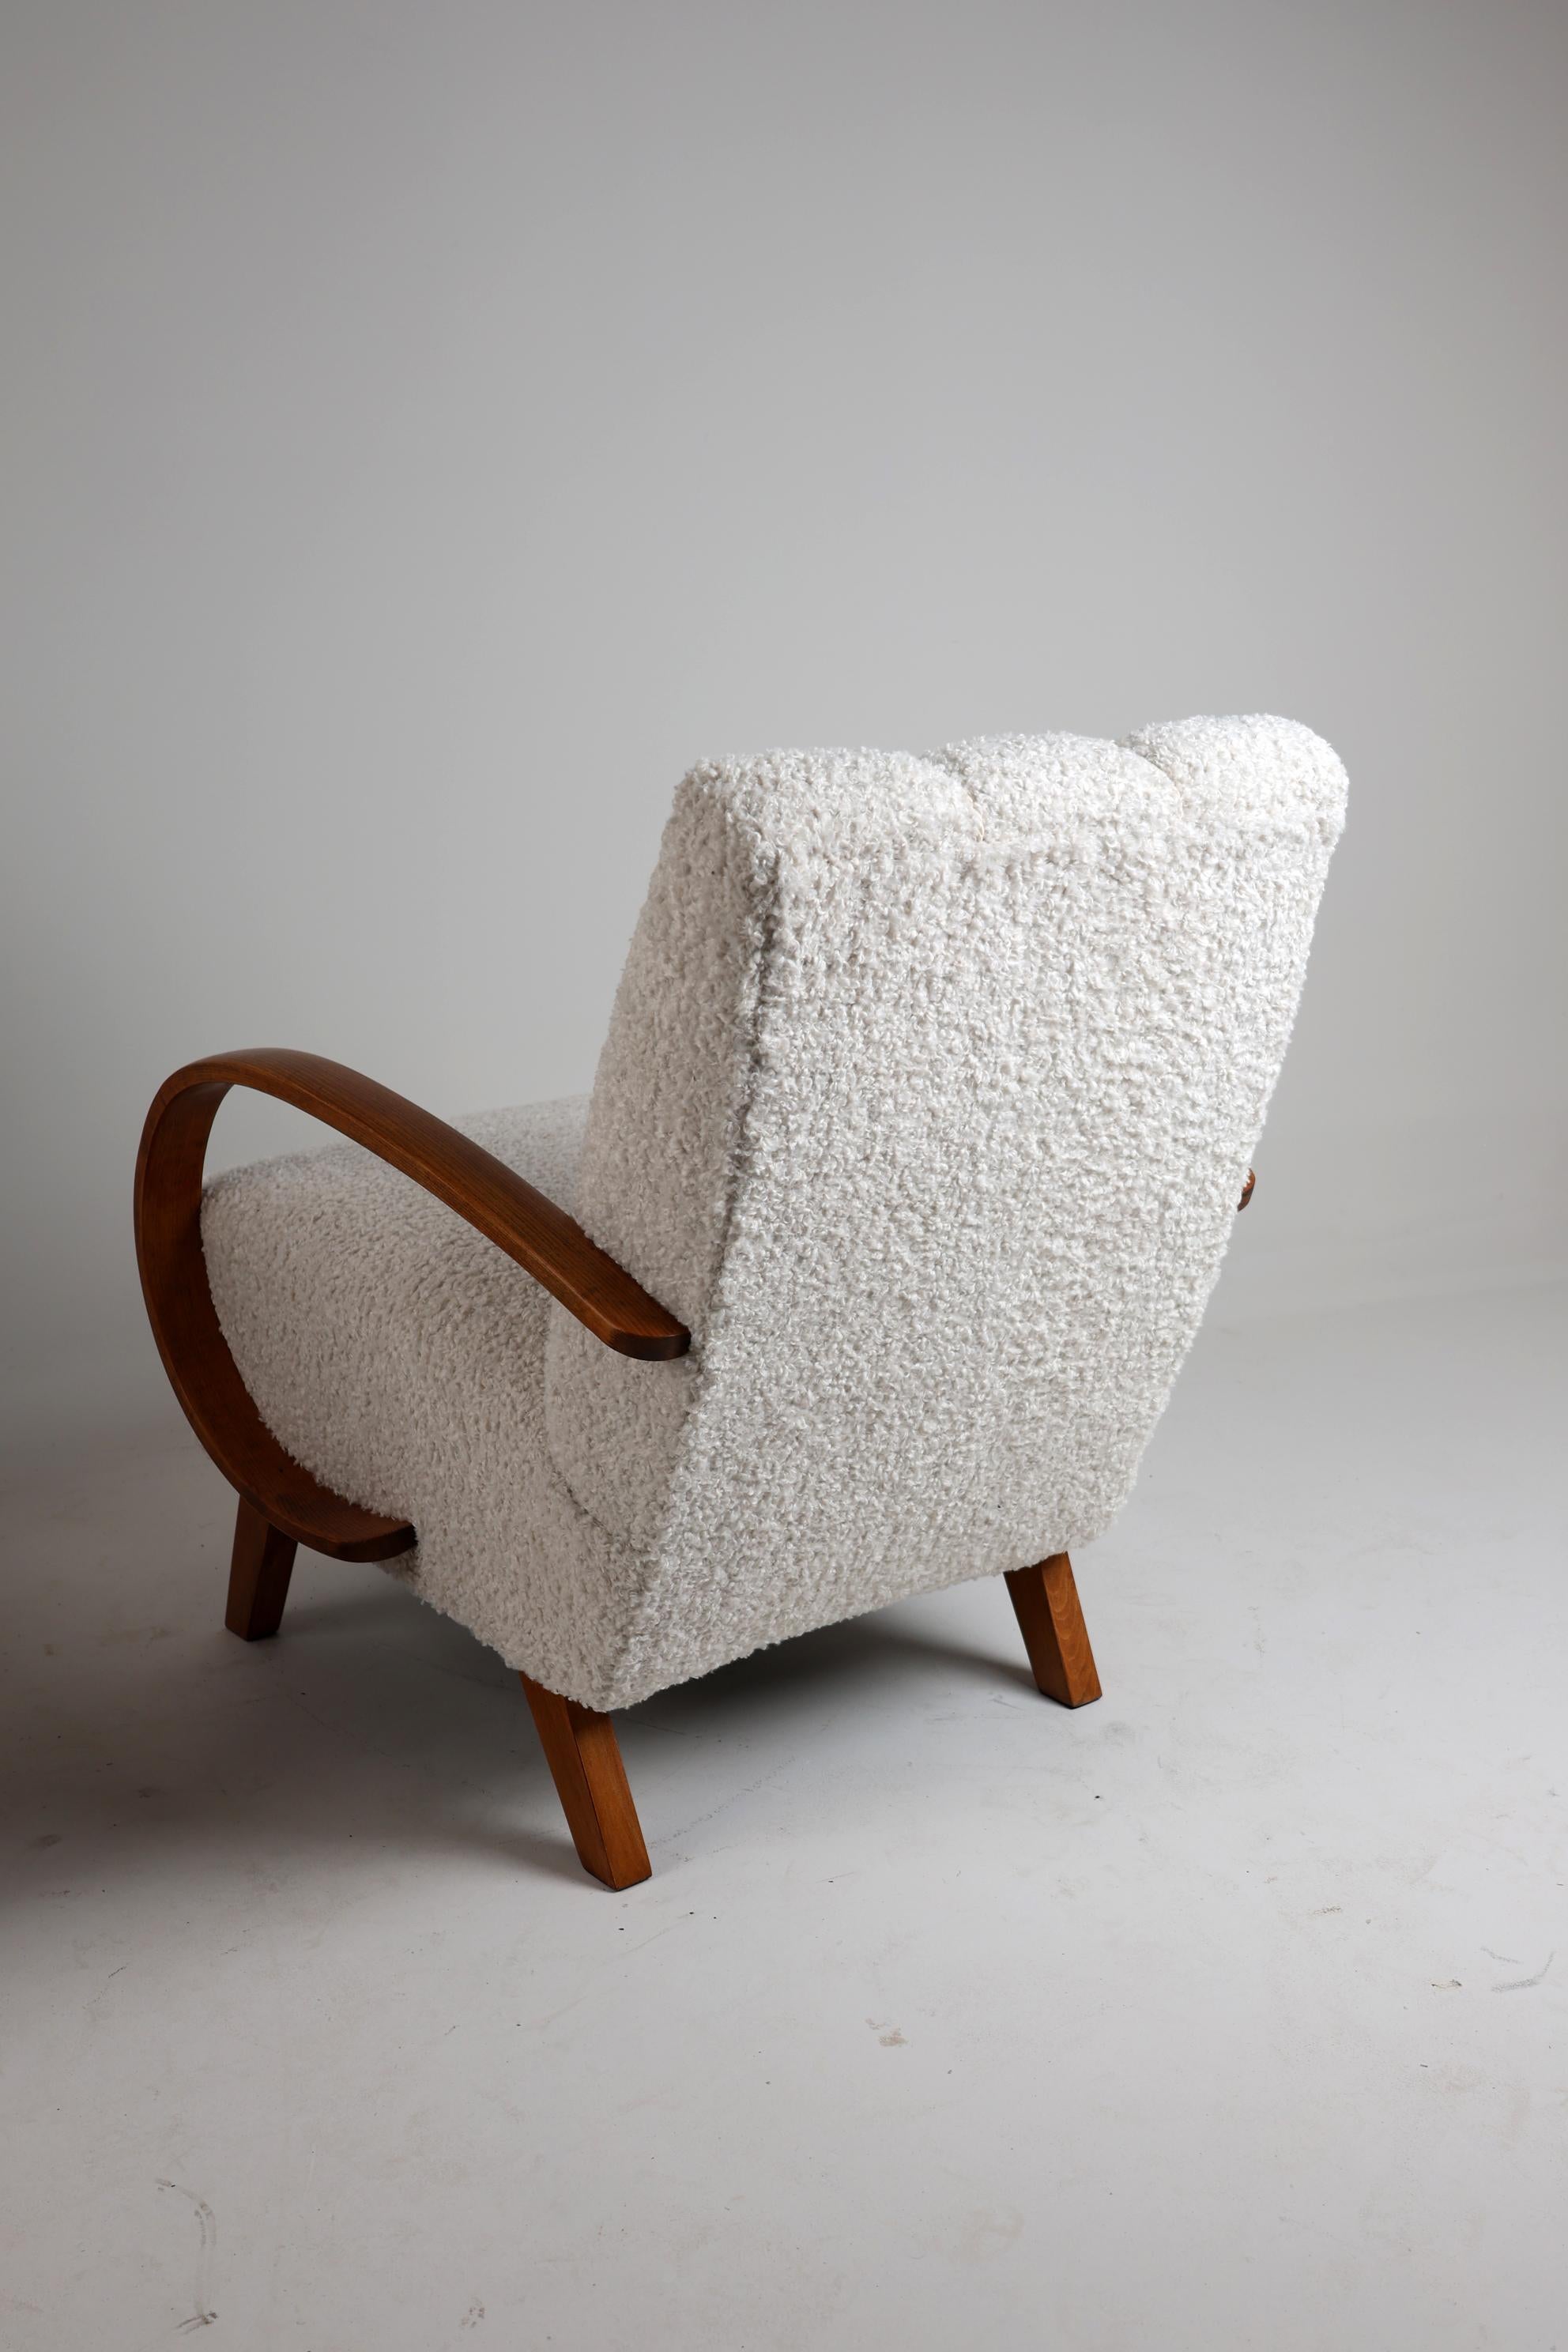 Birch A pair of Armchairs H-410 by Jindrich Halabala from the 1950s For Sale